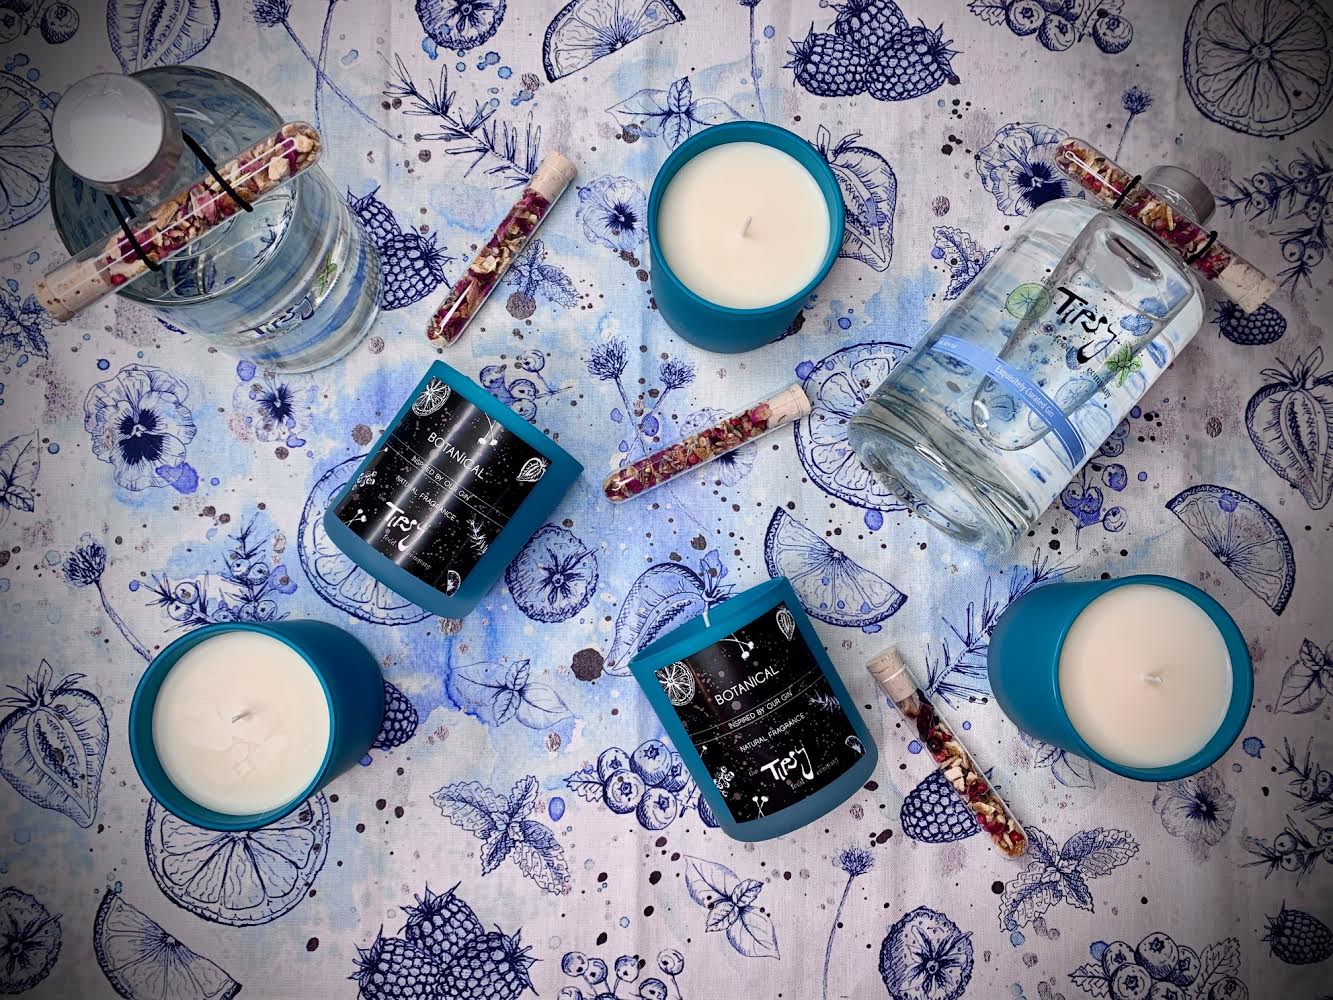 A set of candles and a bottle of water on a blue tablecloth.